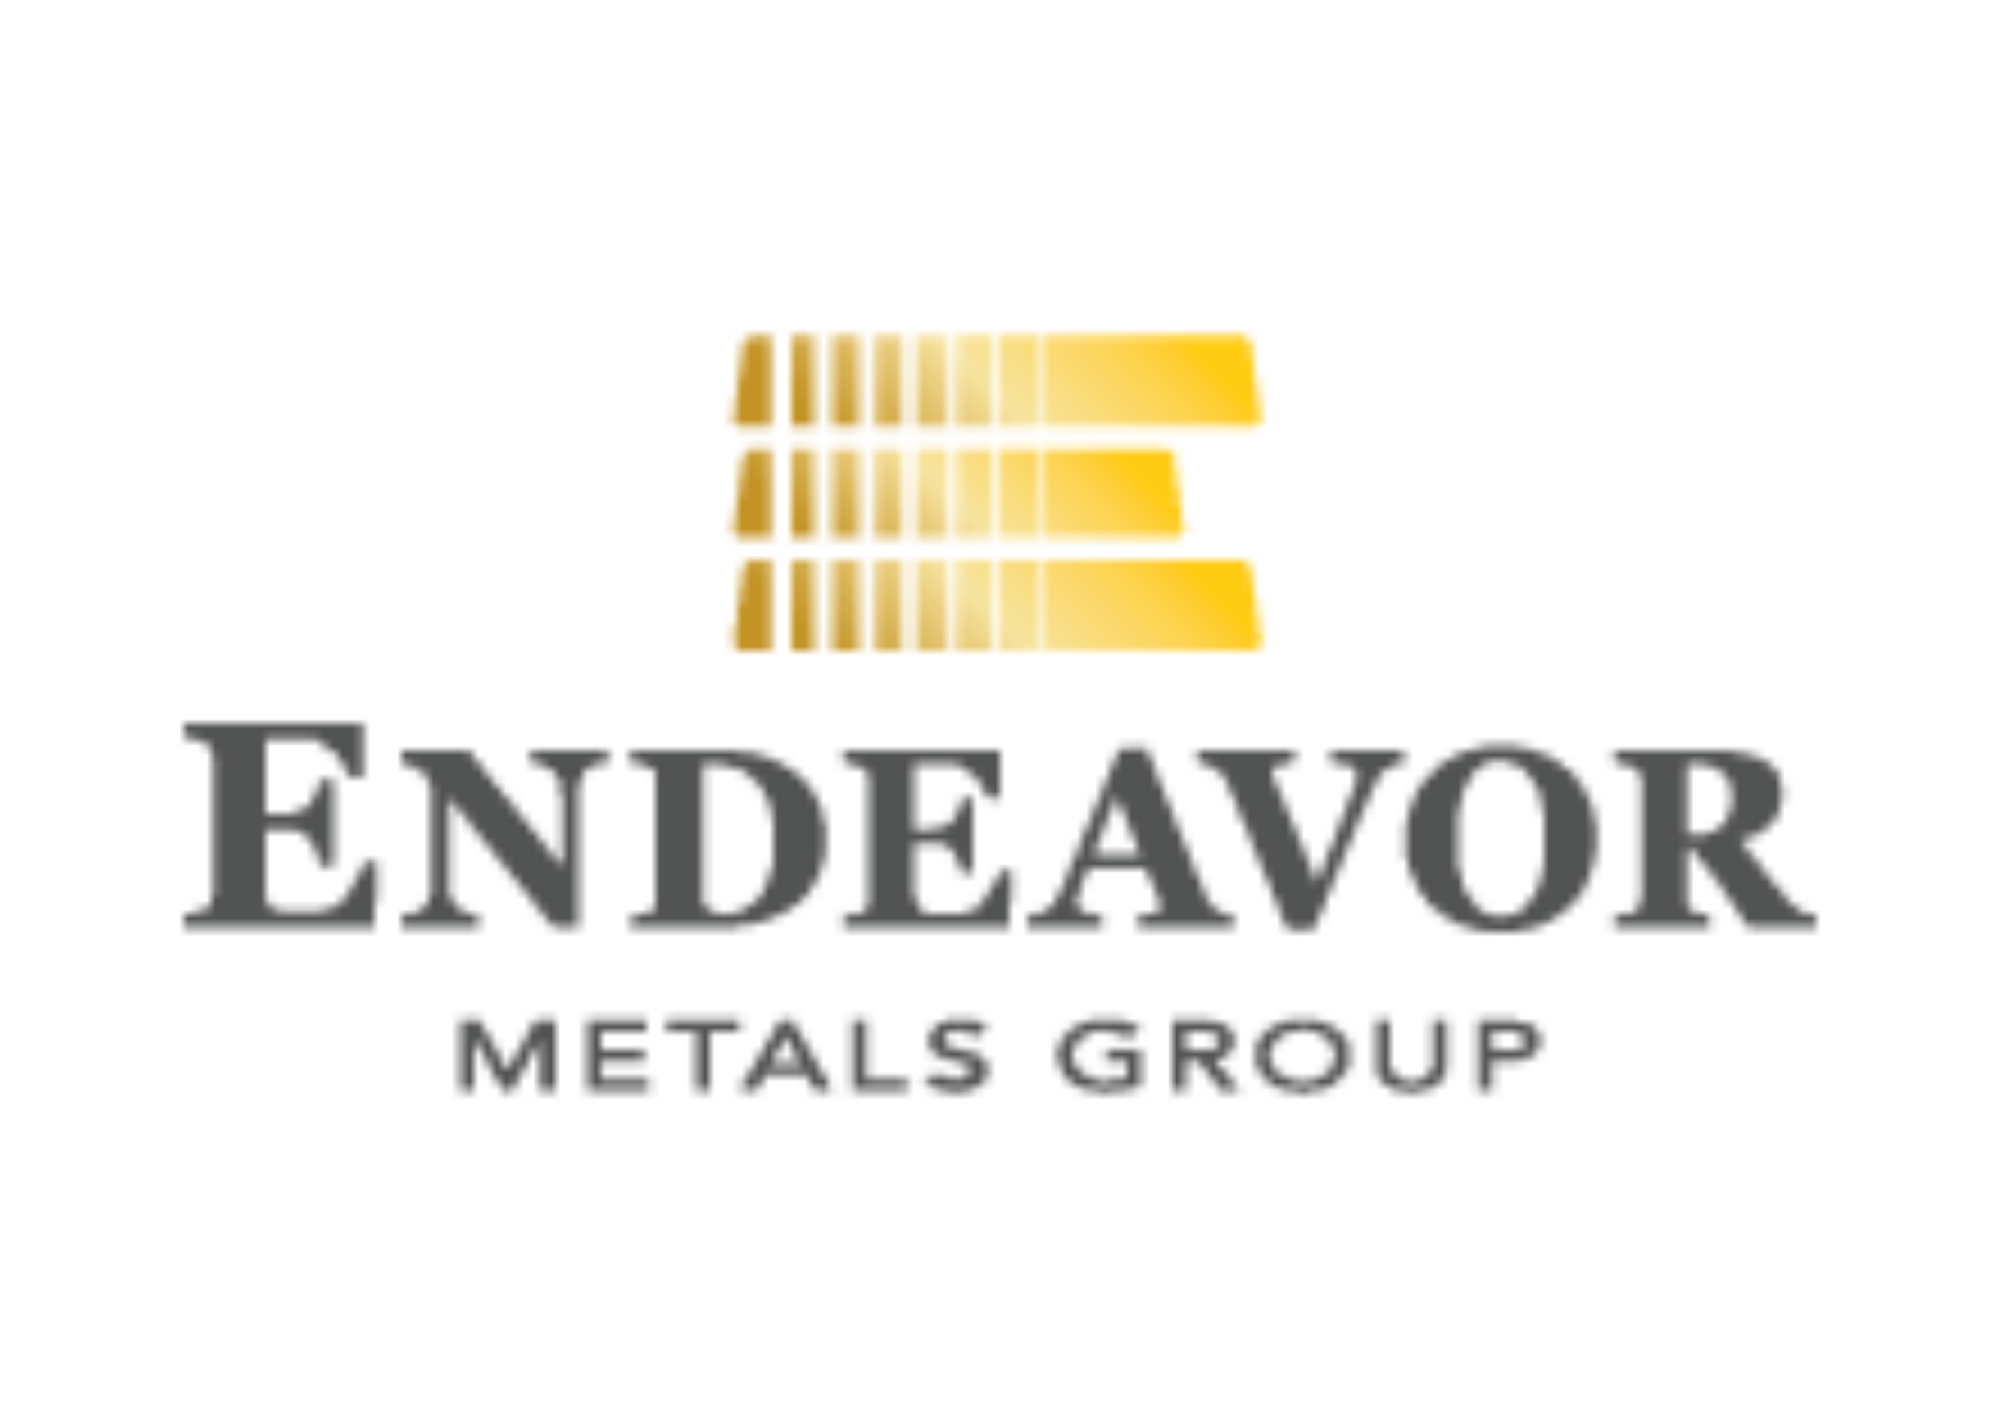 Endeavor Metals Group, Tuesday, April 19, 2022, Press release picture